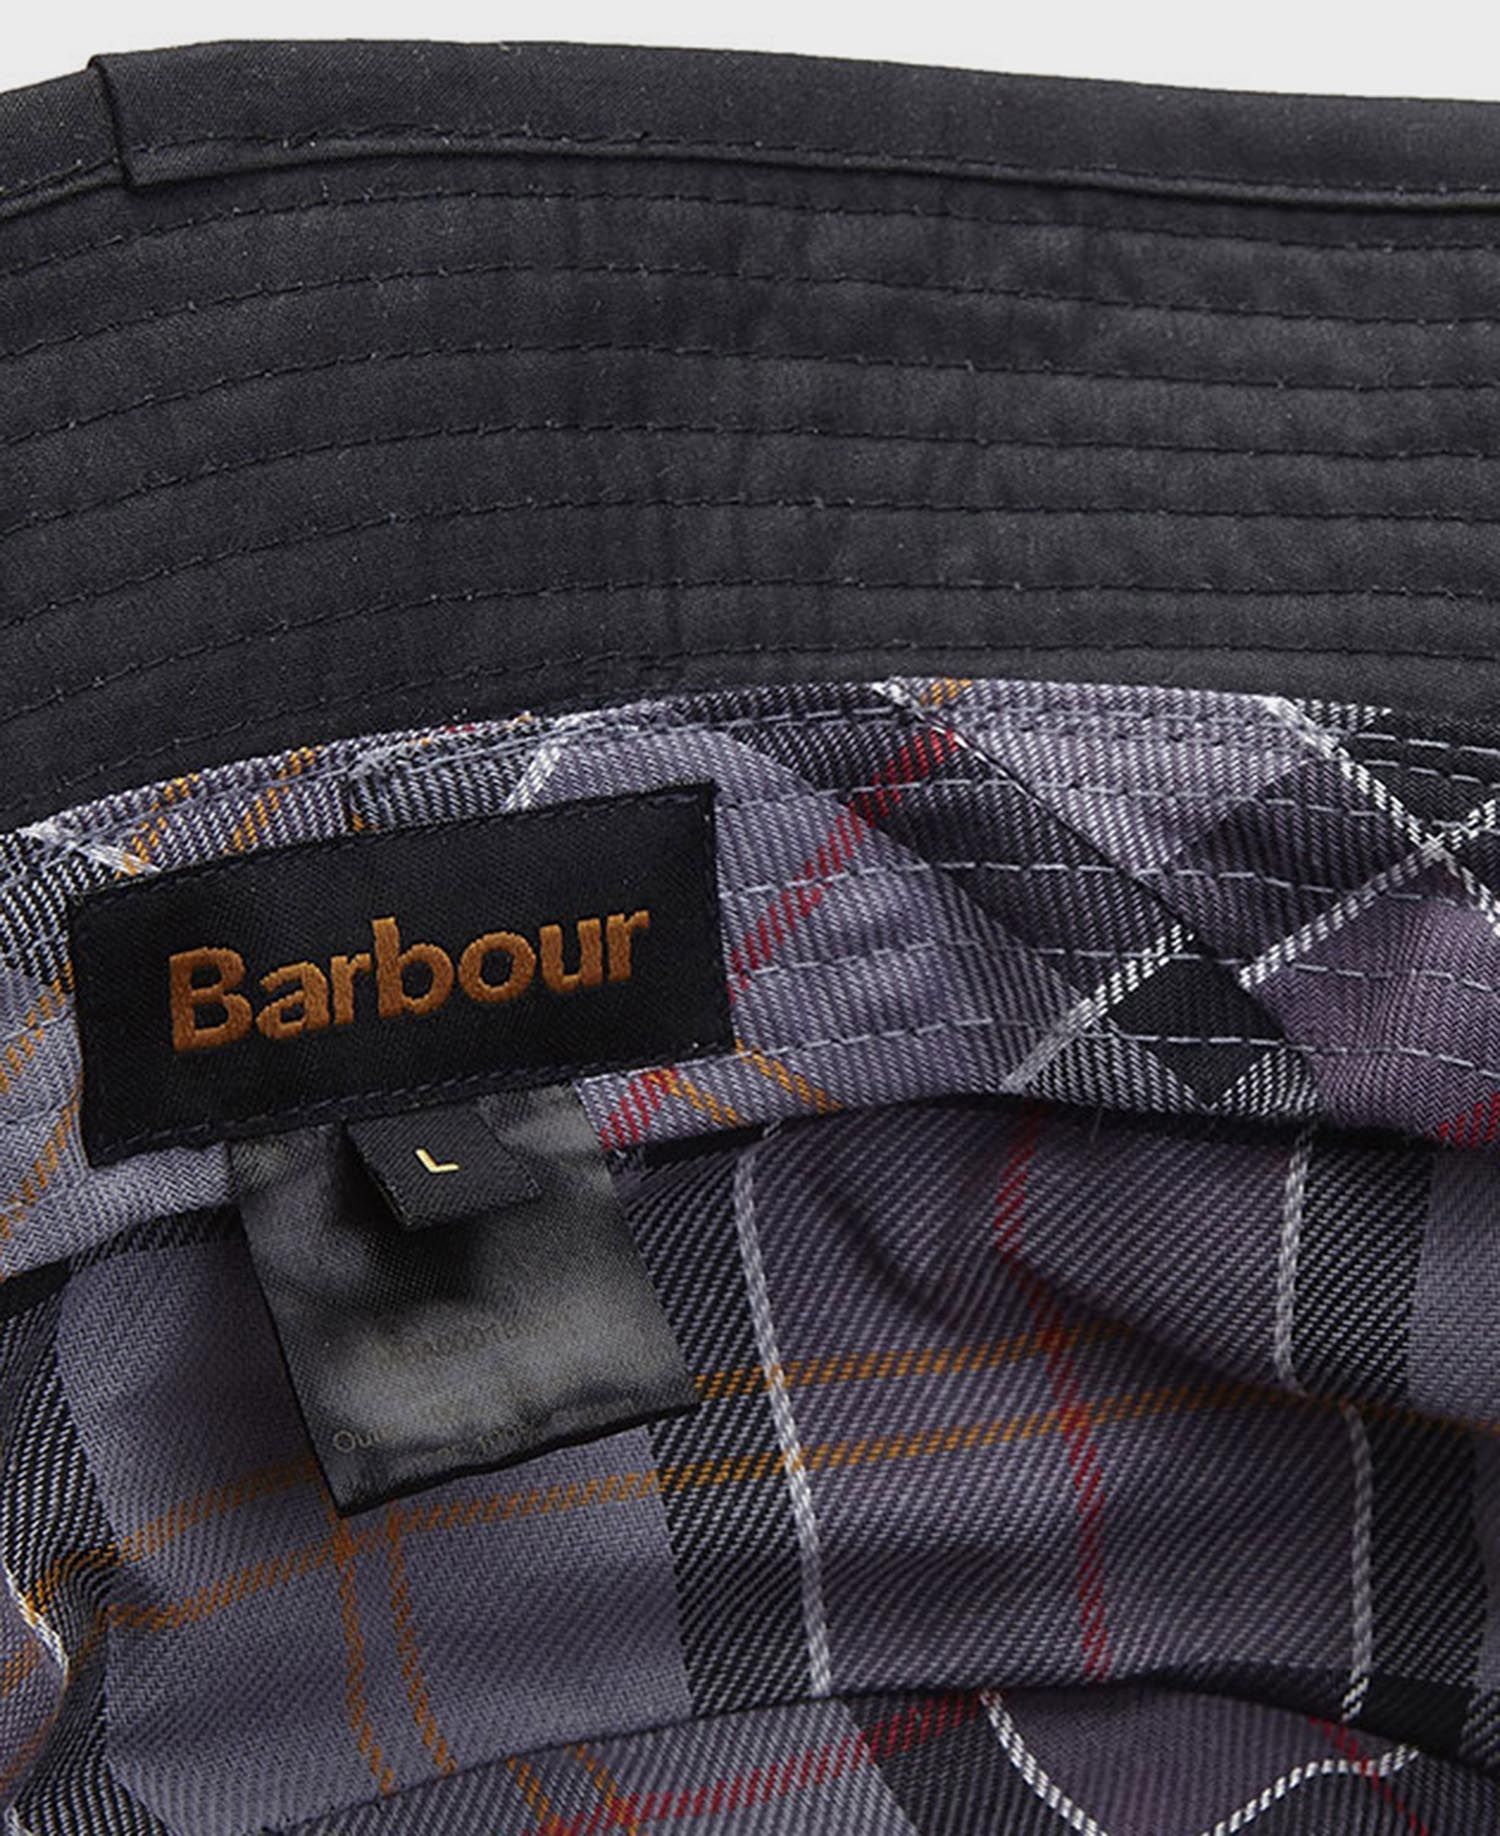 Barbour Wax Sports Hat in Black | Barbour | Barbour